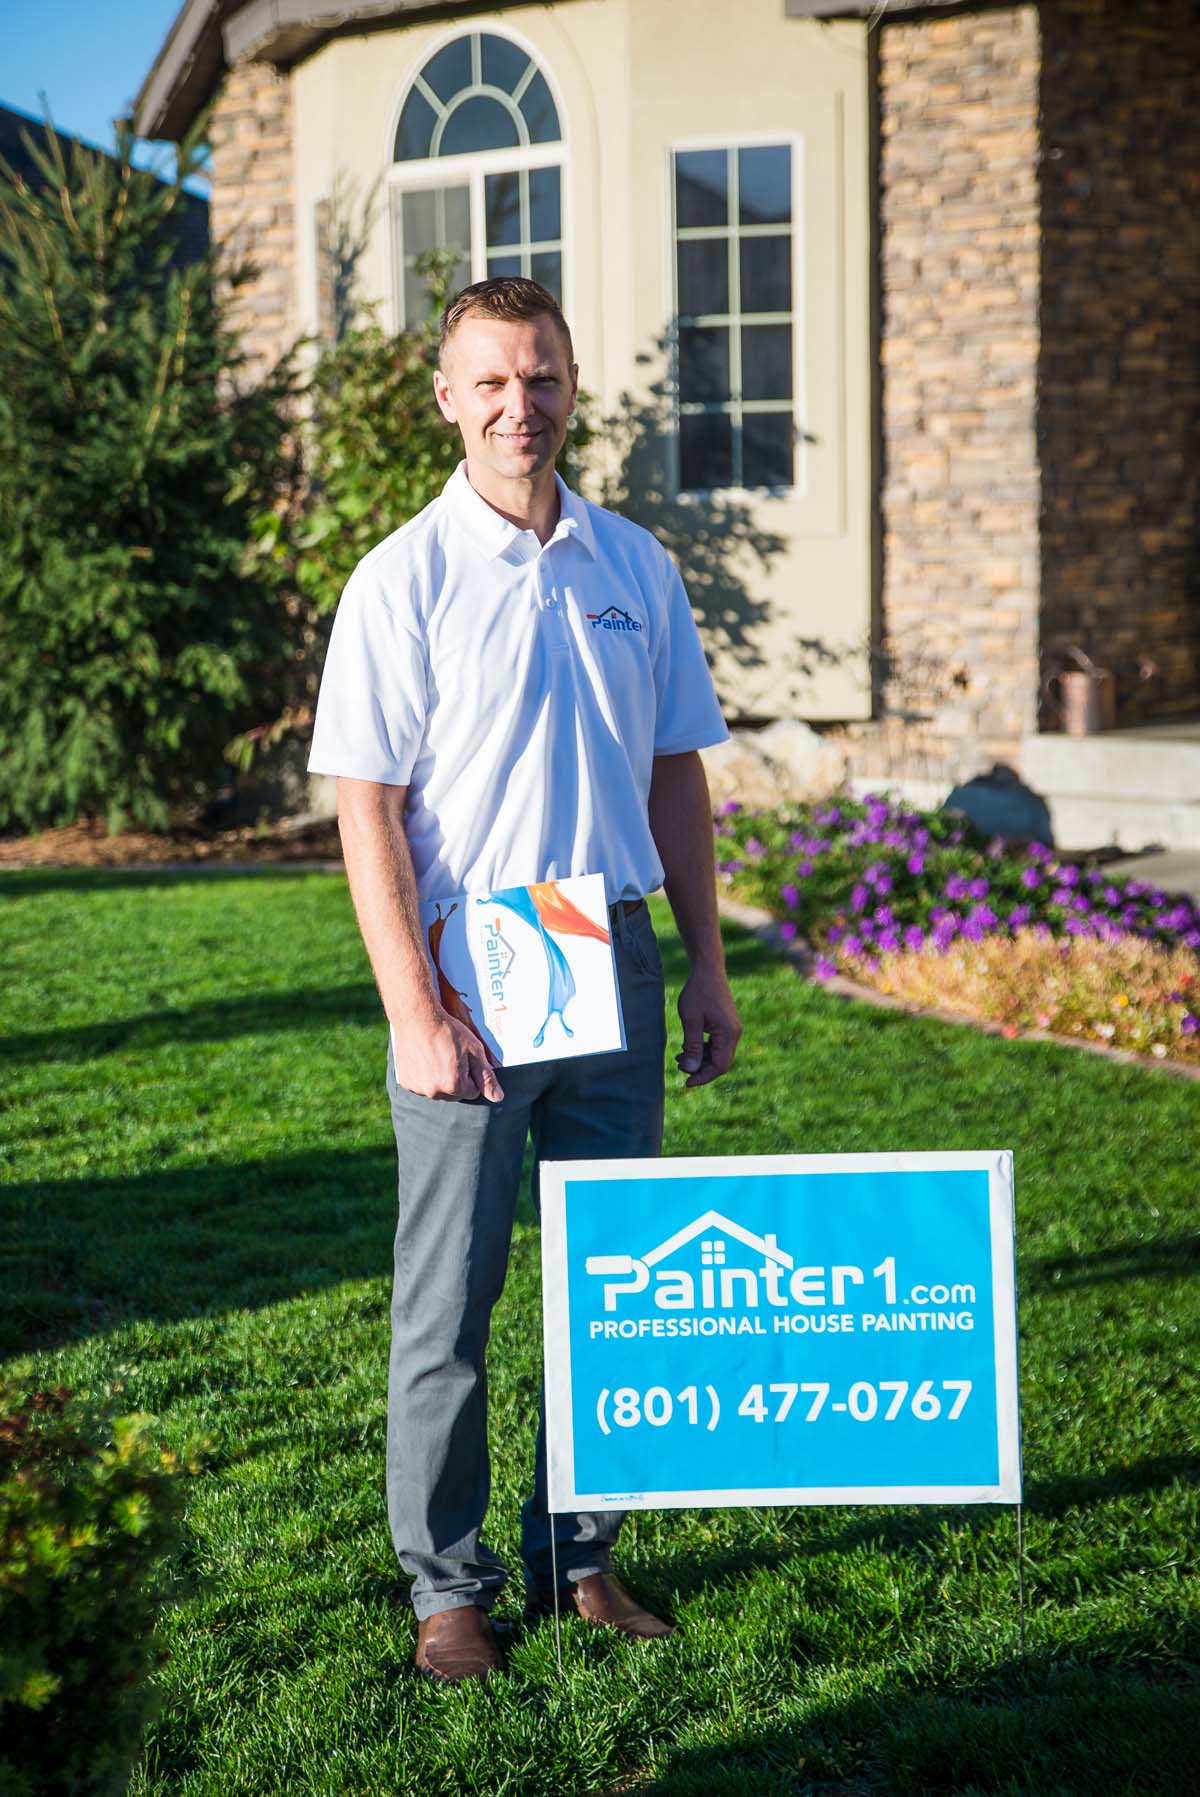 This Painter1 owner stands by a beautiful home painted by his franchise.